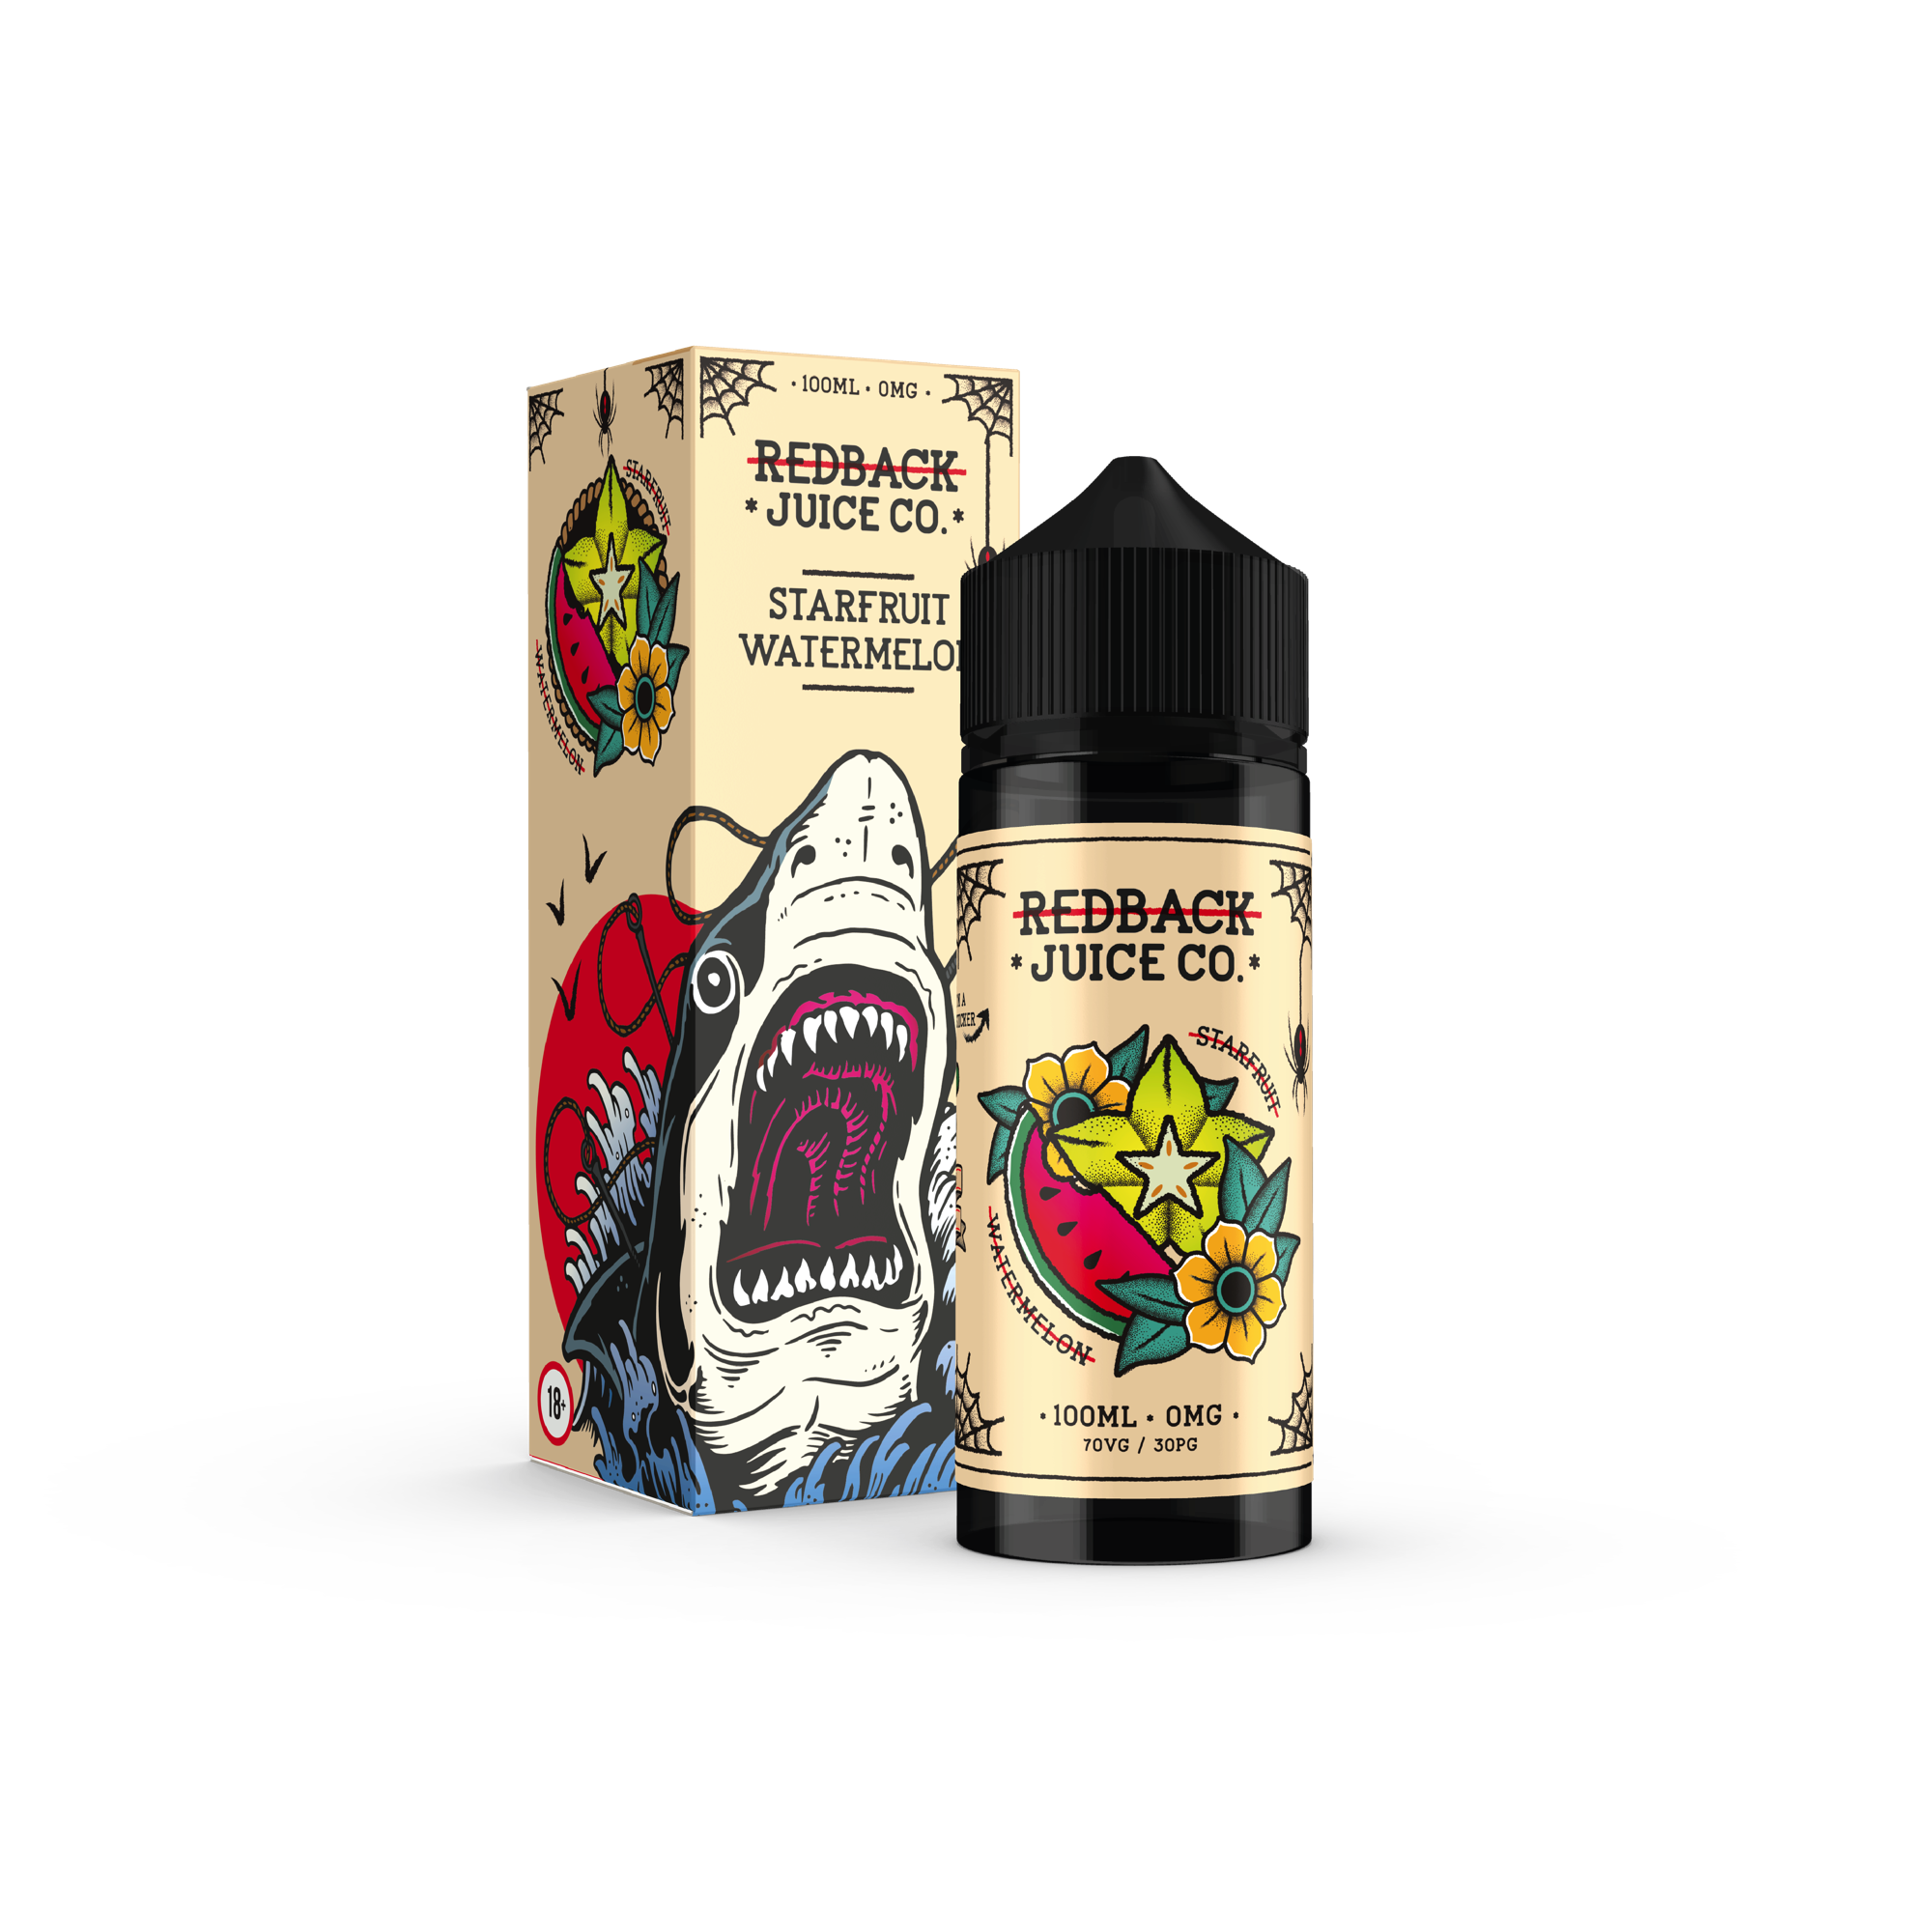 Starfruit and Watermelon by Redback Juice Co Collection